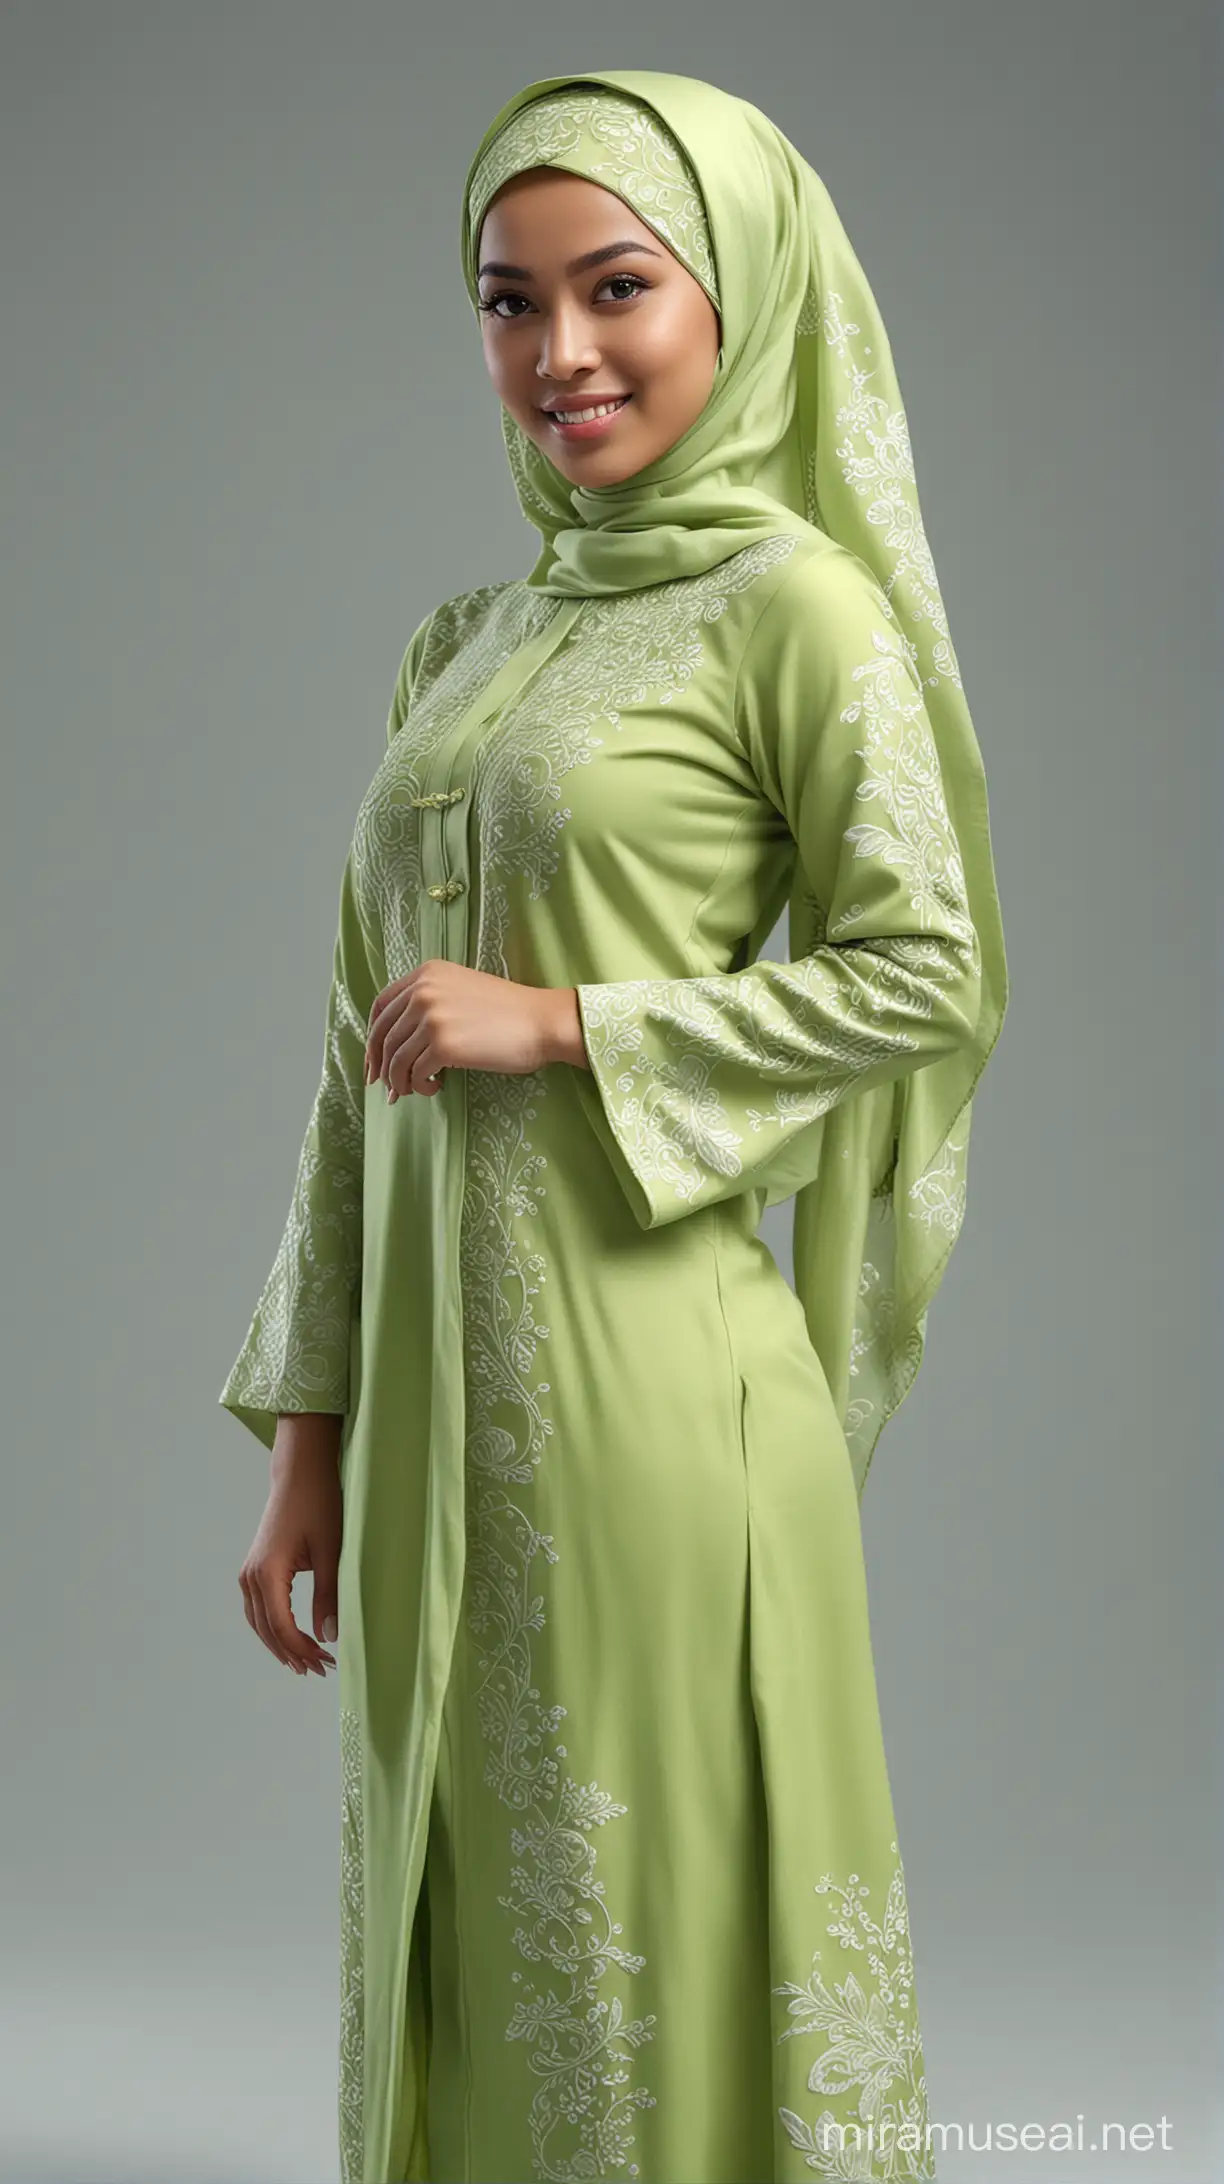 Professional photography, 3D, HDR, 16K UHD, full body shot, create a highly detailed photorealistic image of a young beautiful Malay female in fully hijab cover whole body, looking elegant with soft gentle smile in a lime green baju kurung with intricate design, face facing frontview, hand outstretched, ultradetailed, ultra HD, high resolution, peach background